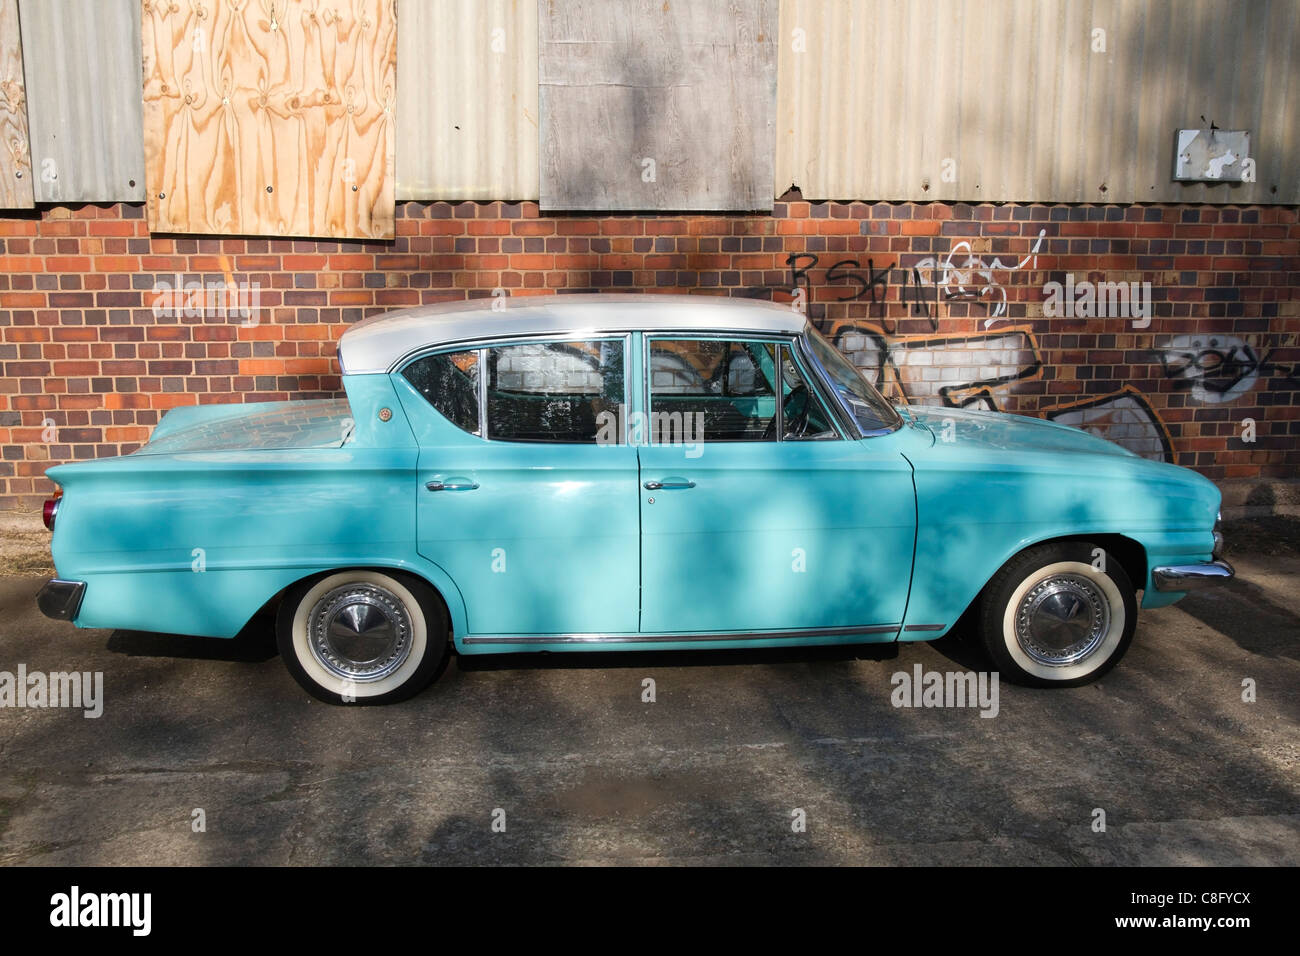 Ford Consul on display Stock Photo